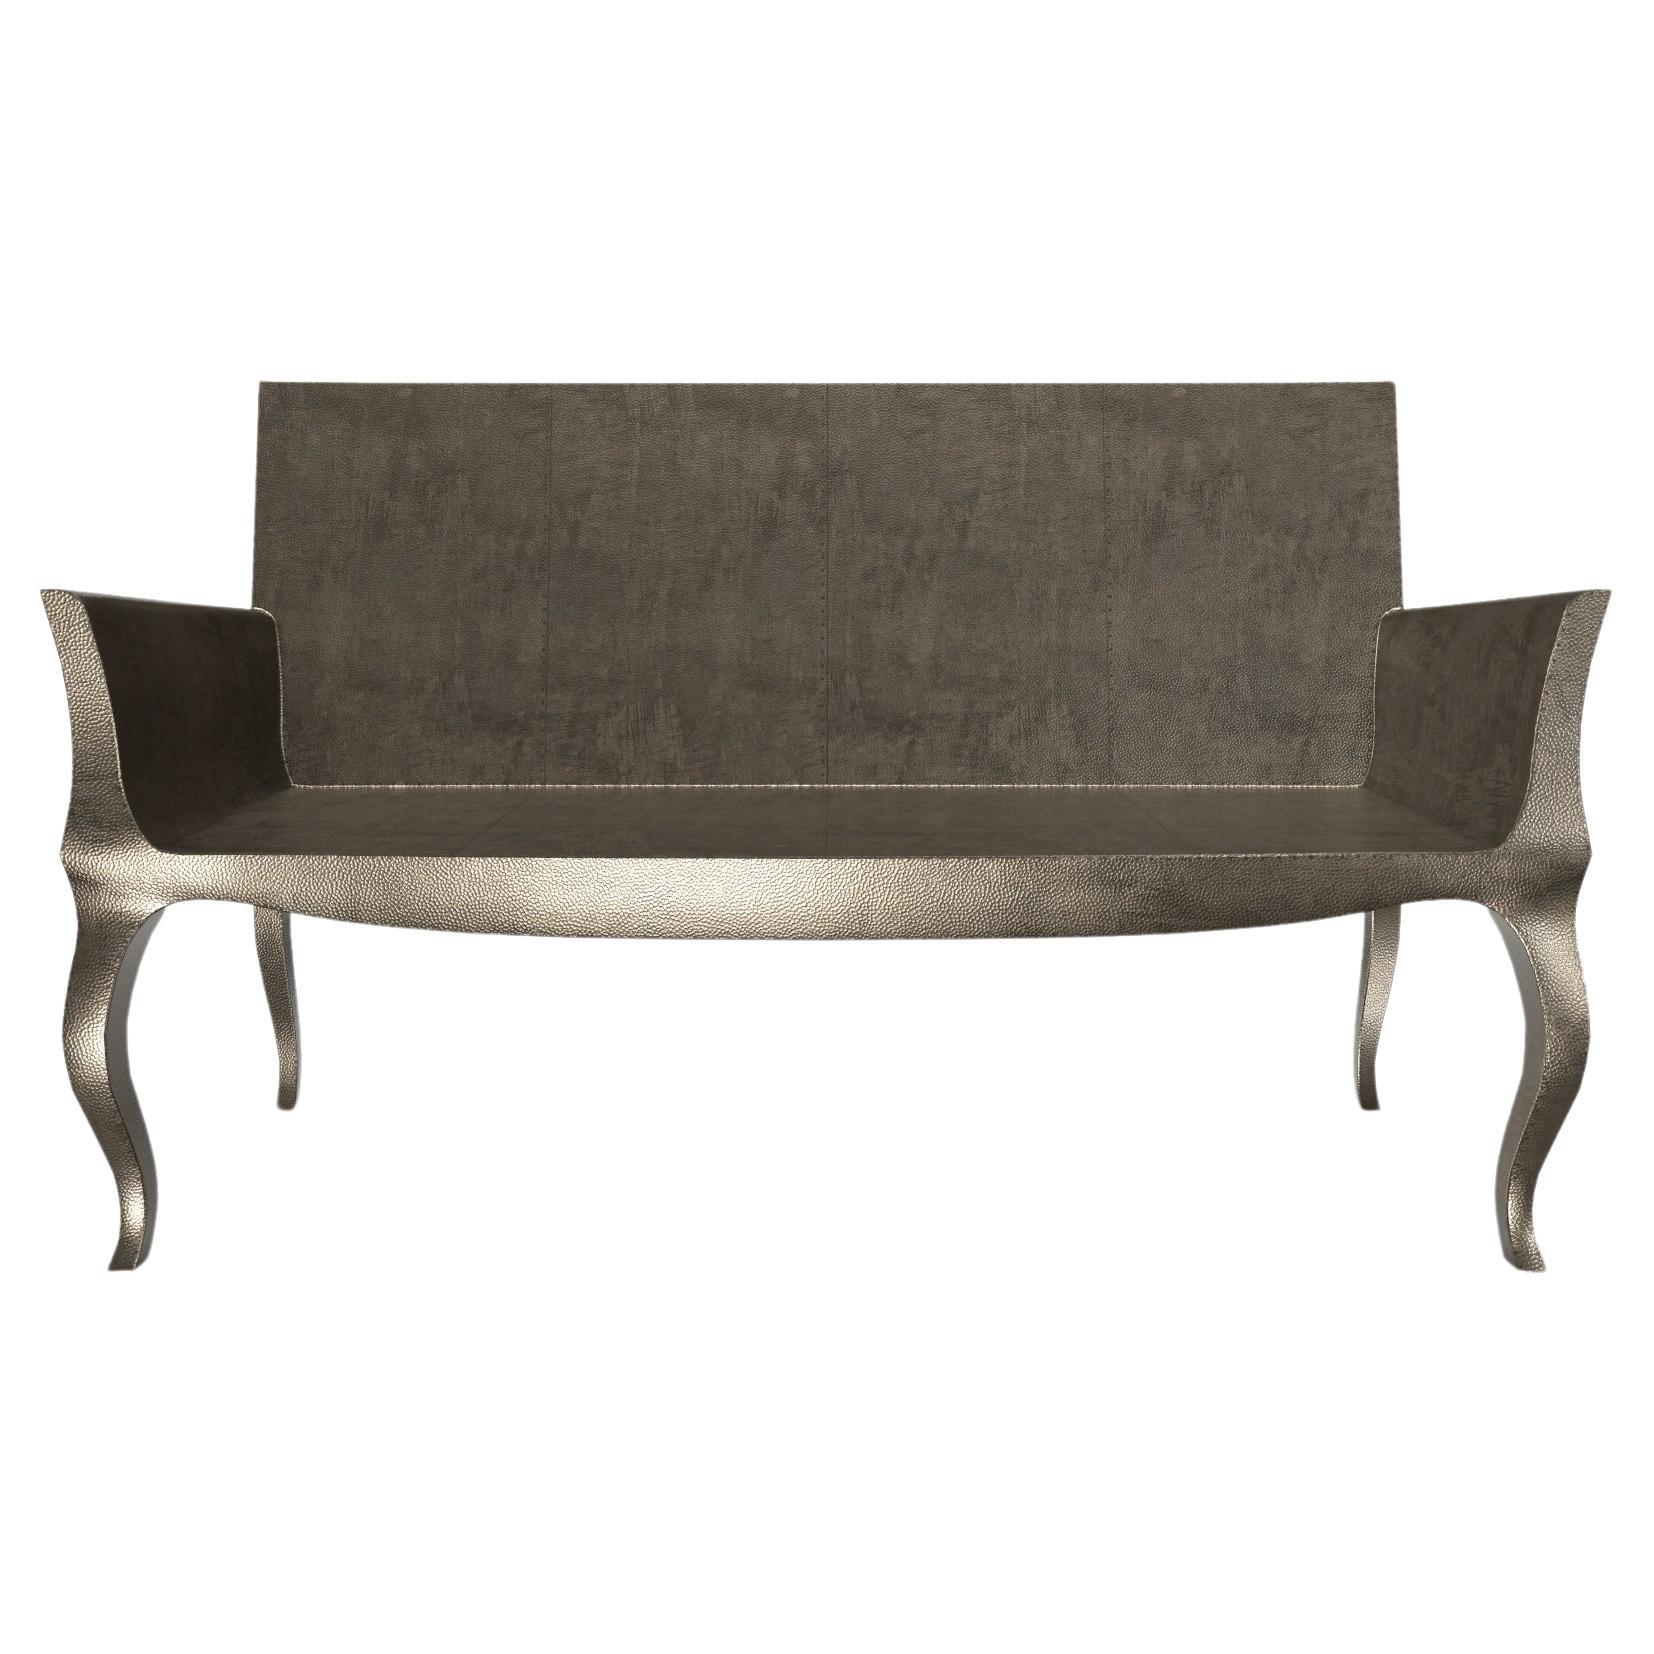 Louise Settee Art Deco Benches in Mid. Hammered Antique Bronze by Paul Mathieu For Sale